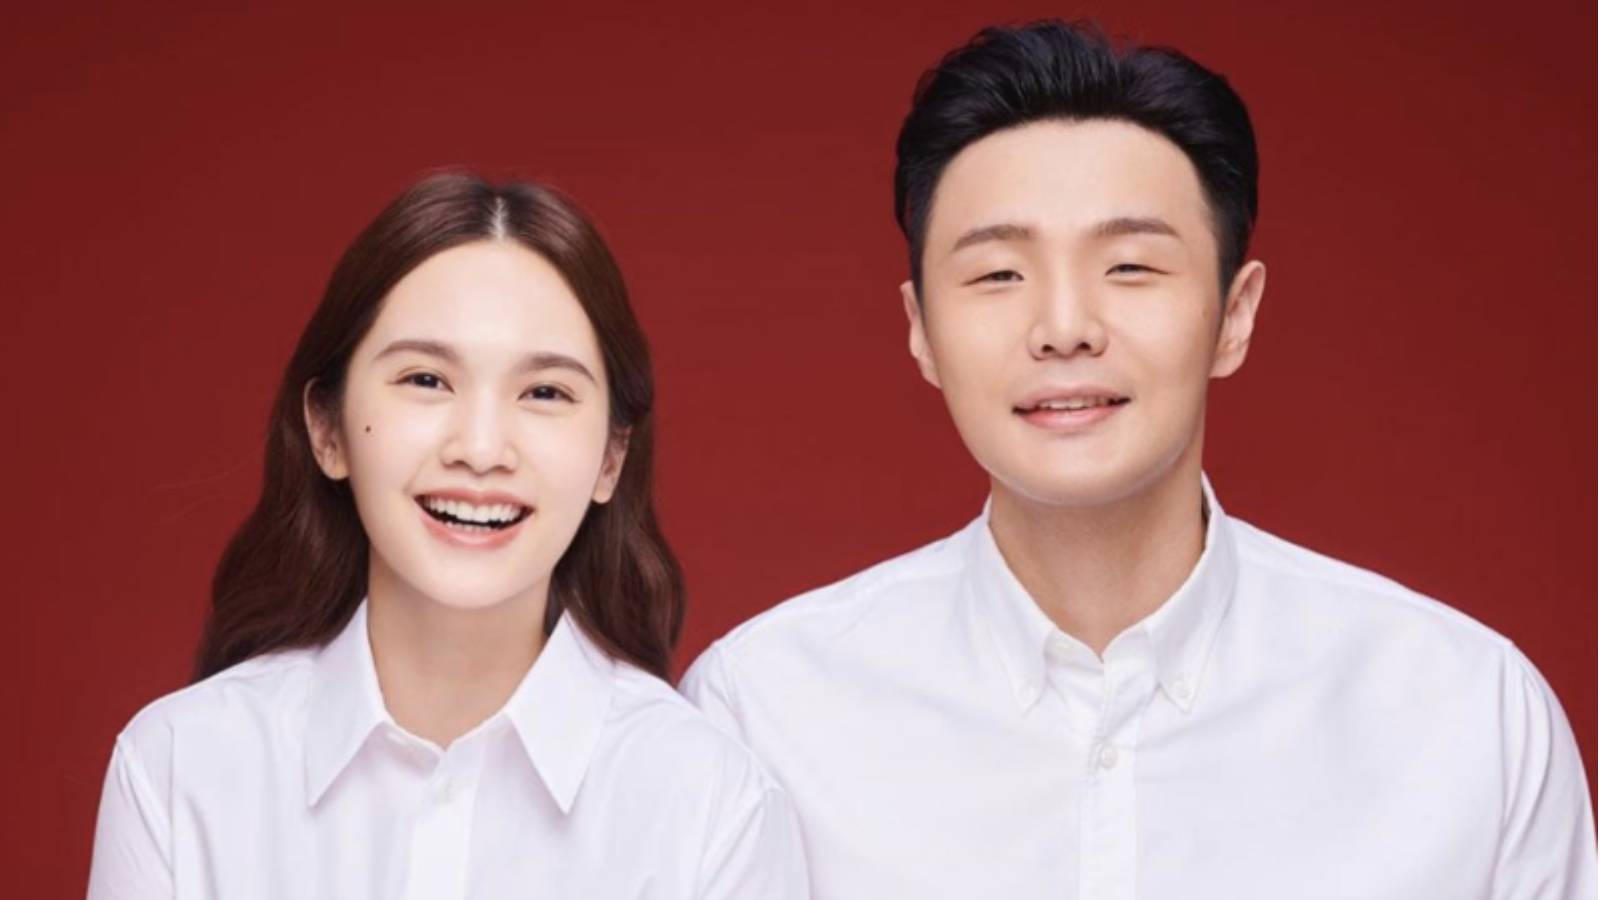 Rainie Yang Hasn’t Seen Li Ronghao In 3 Months… And They’ve Only Been Married For Less Than A Year